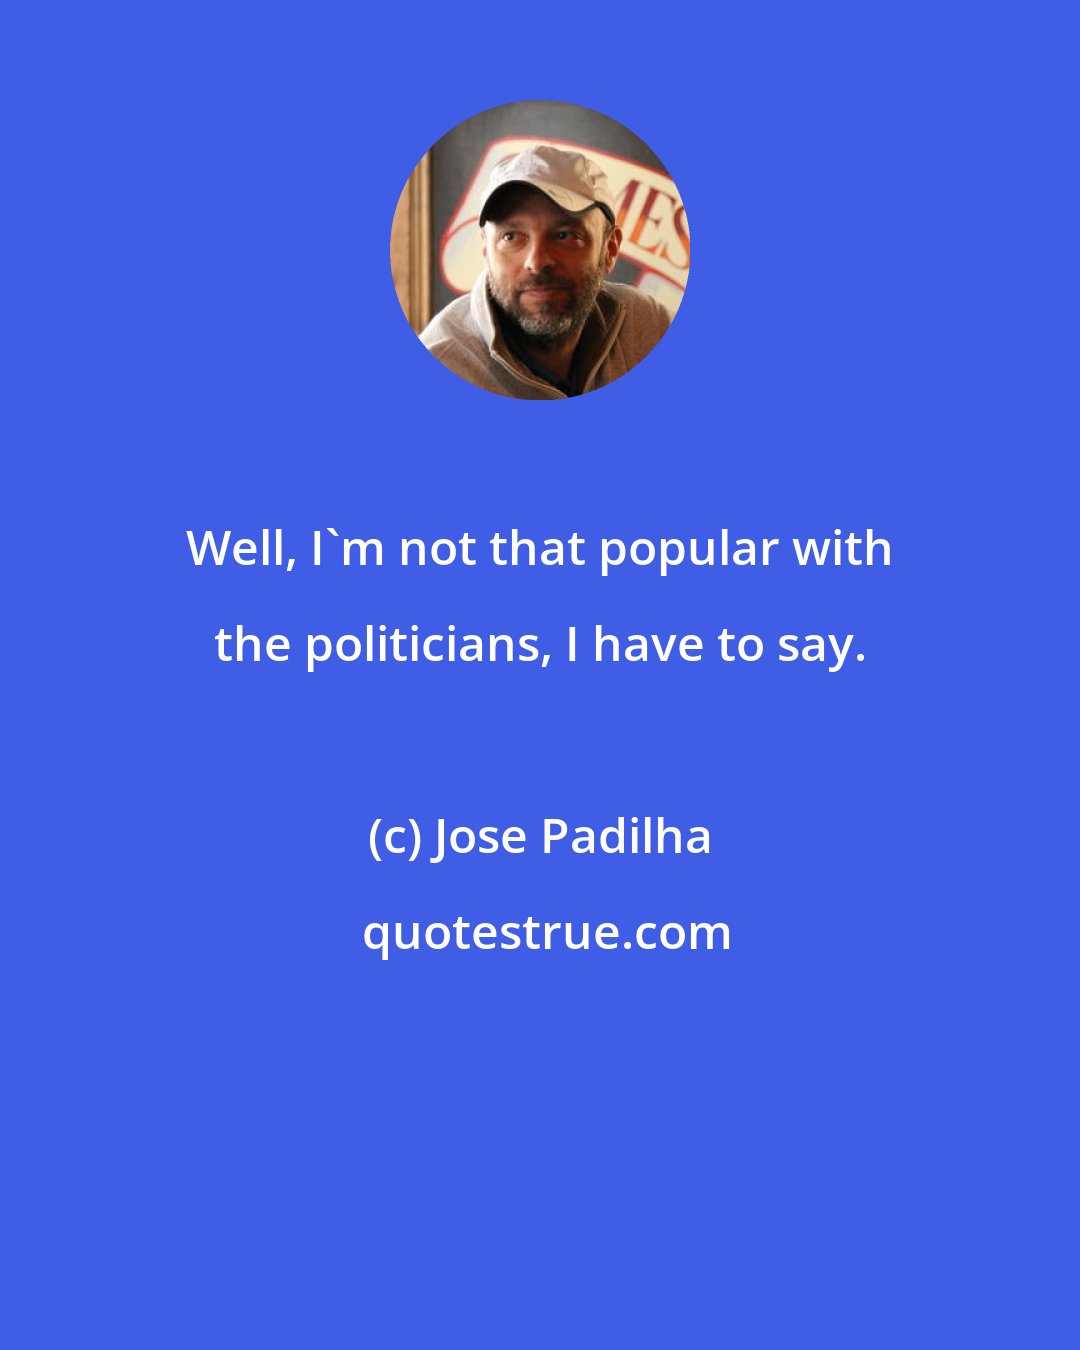 Jose Padilha: Well, I'm not that popular with the politicians, I have to say.